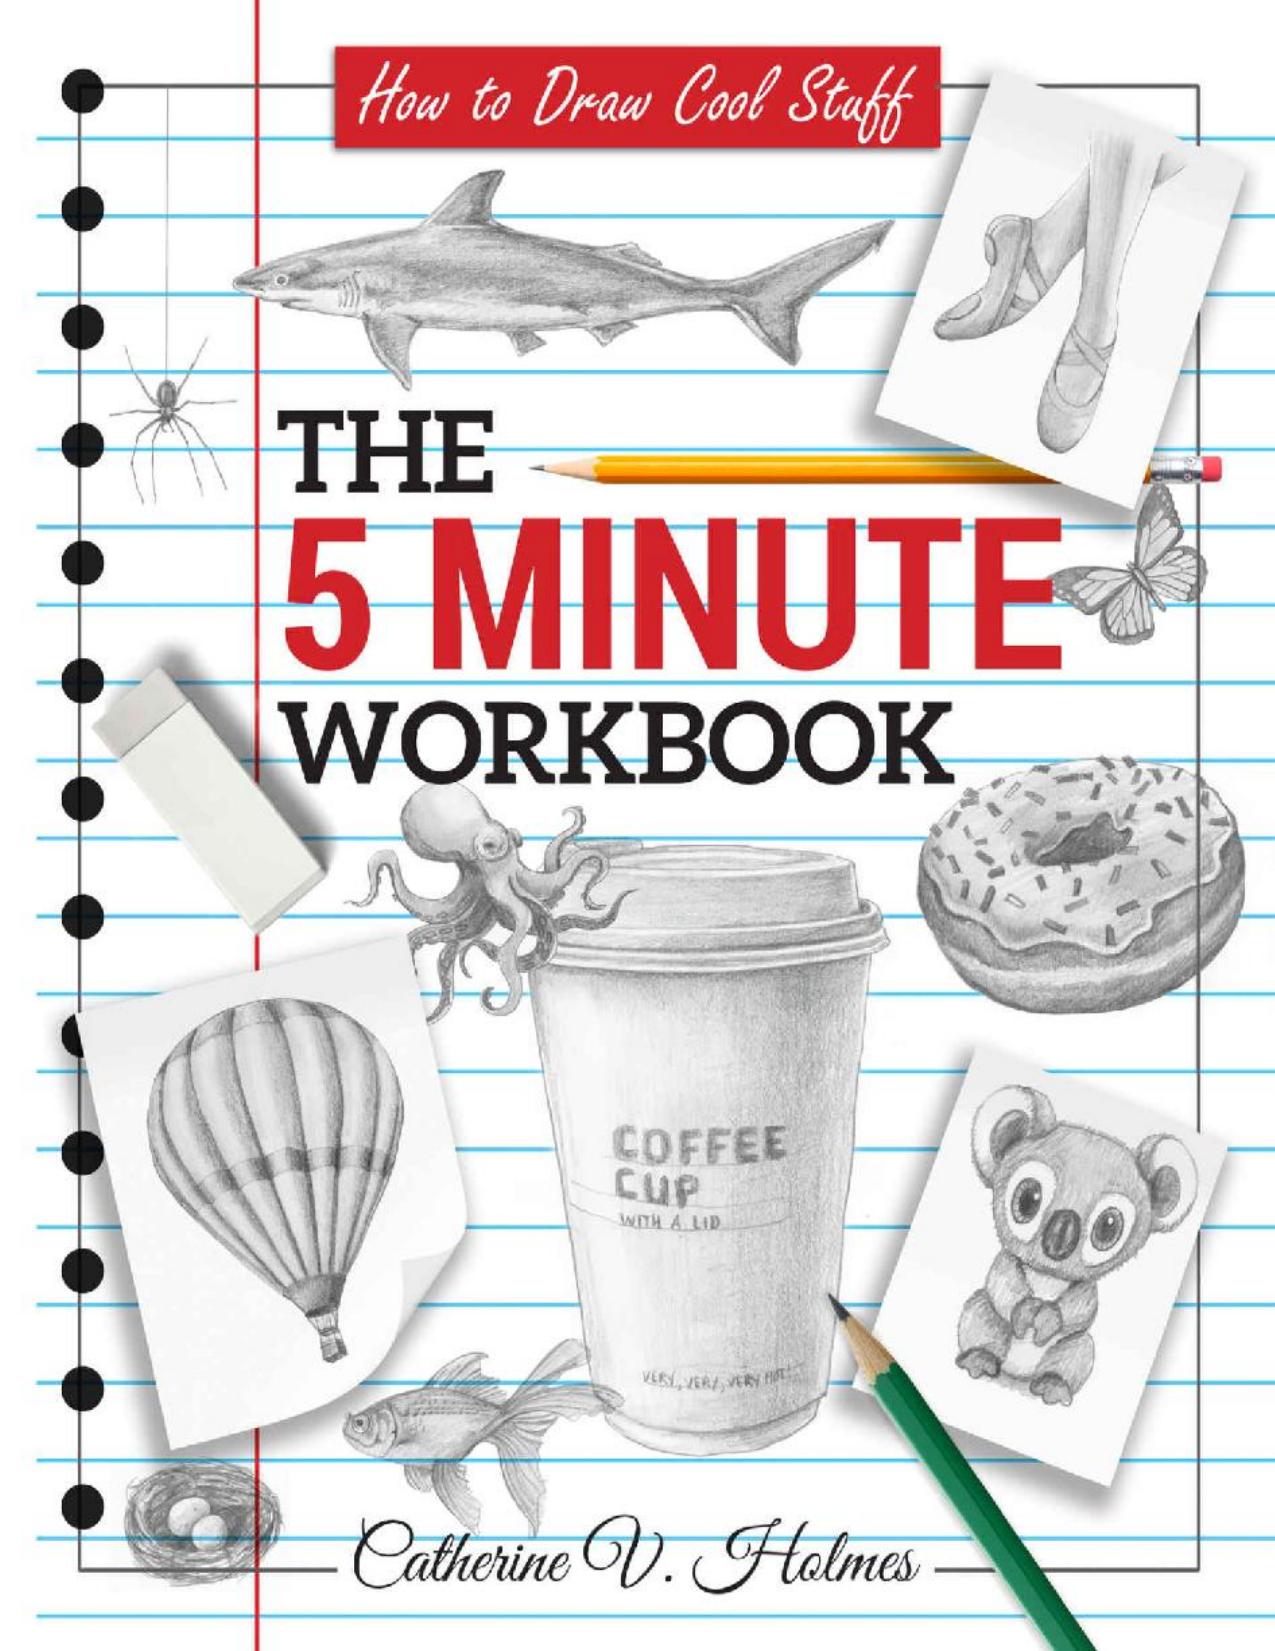 How to Draw Cool Stuff: The 5 Minute Workbook by Catherine Holmes